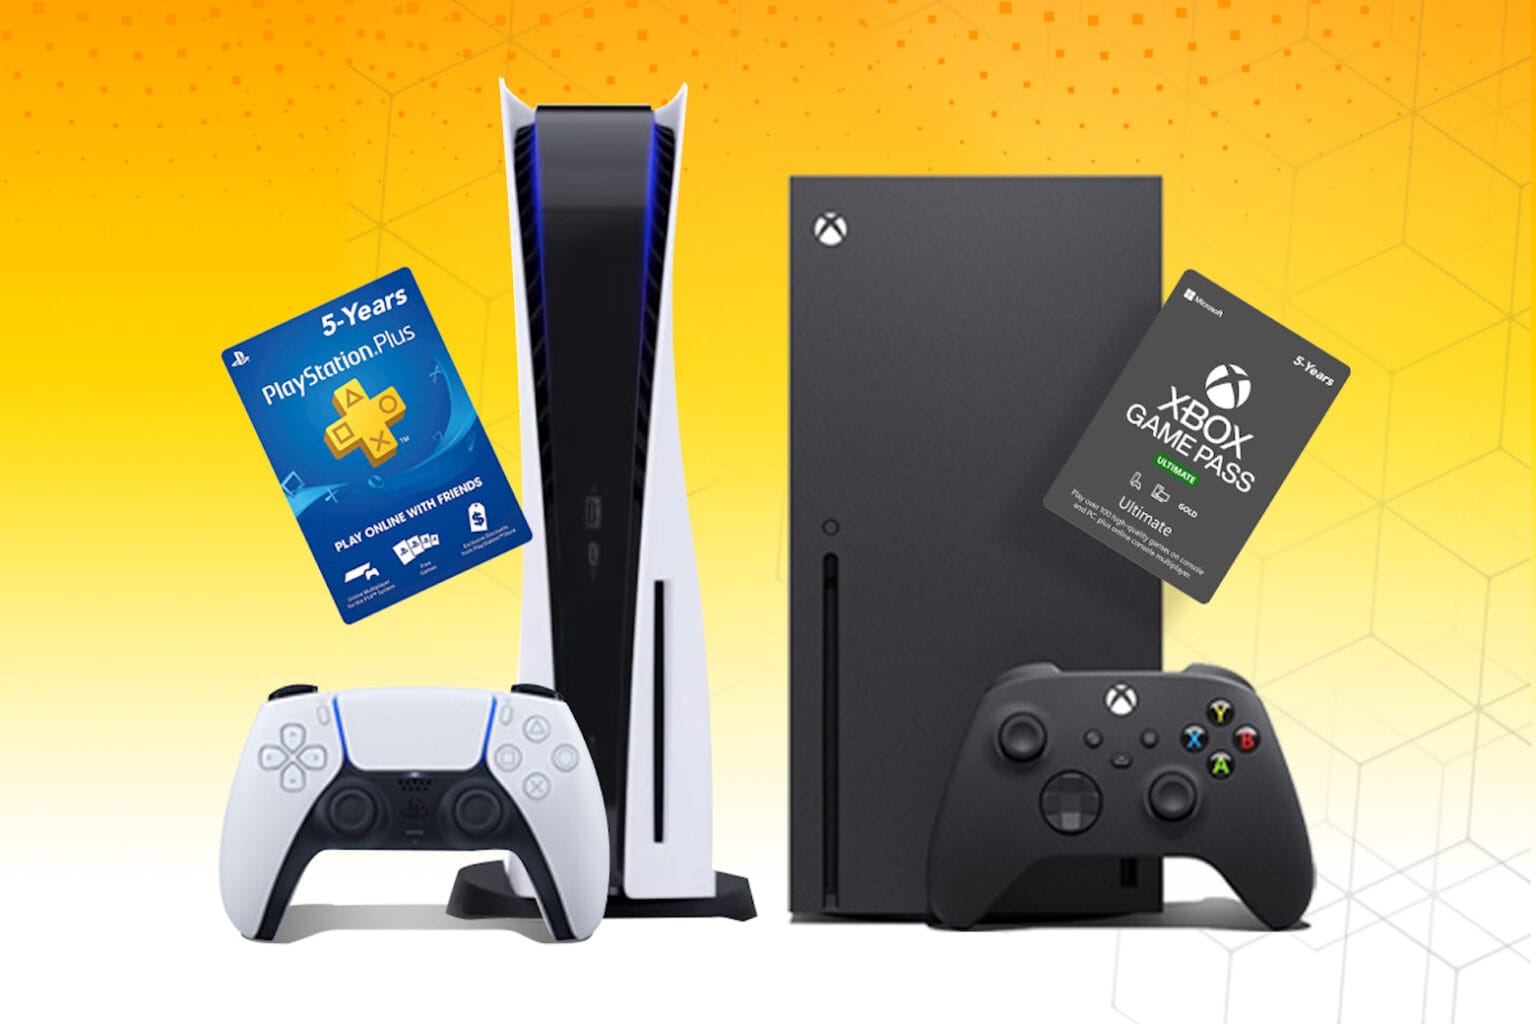 In the Ultimate Gaming Giveaway, you could win a PlayStation 5, an Xbox X Series and much more.